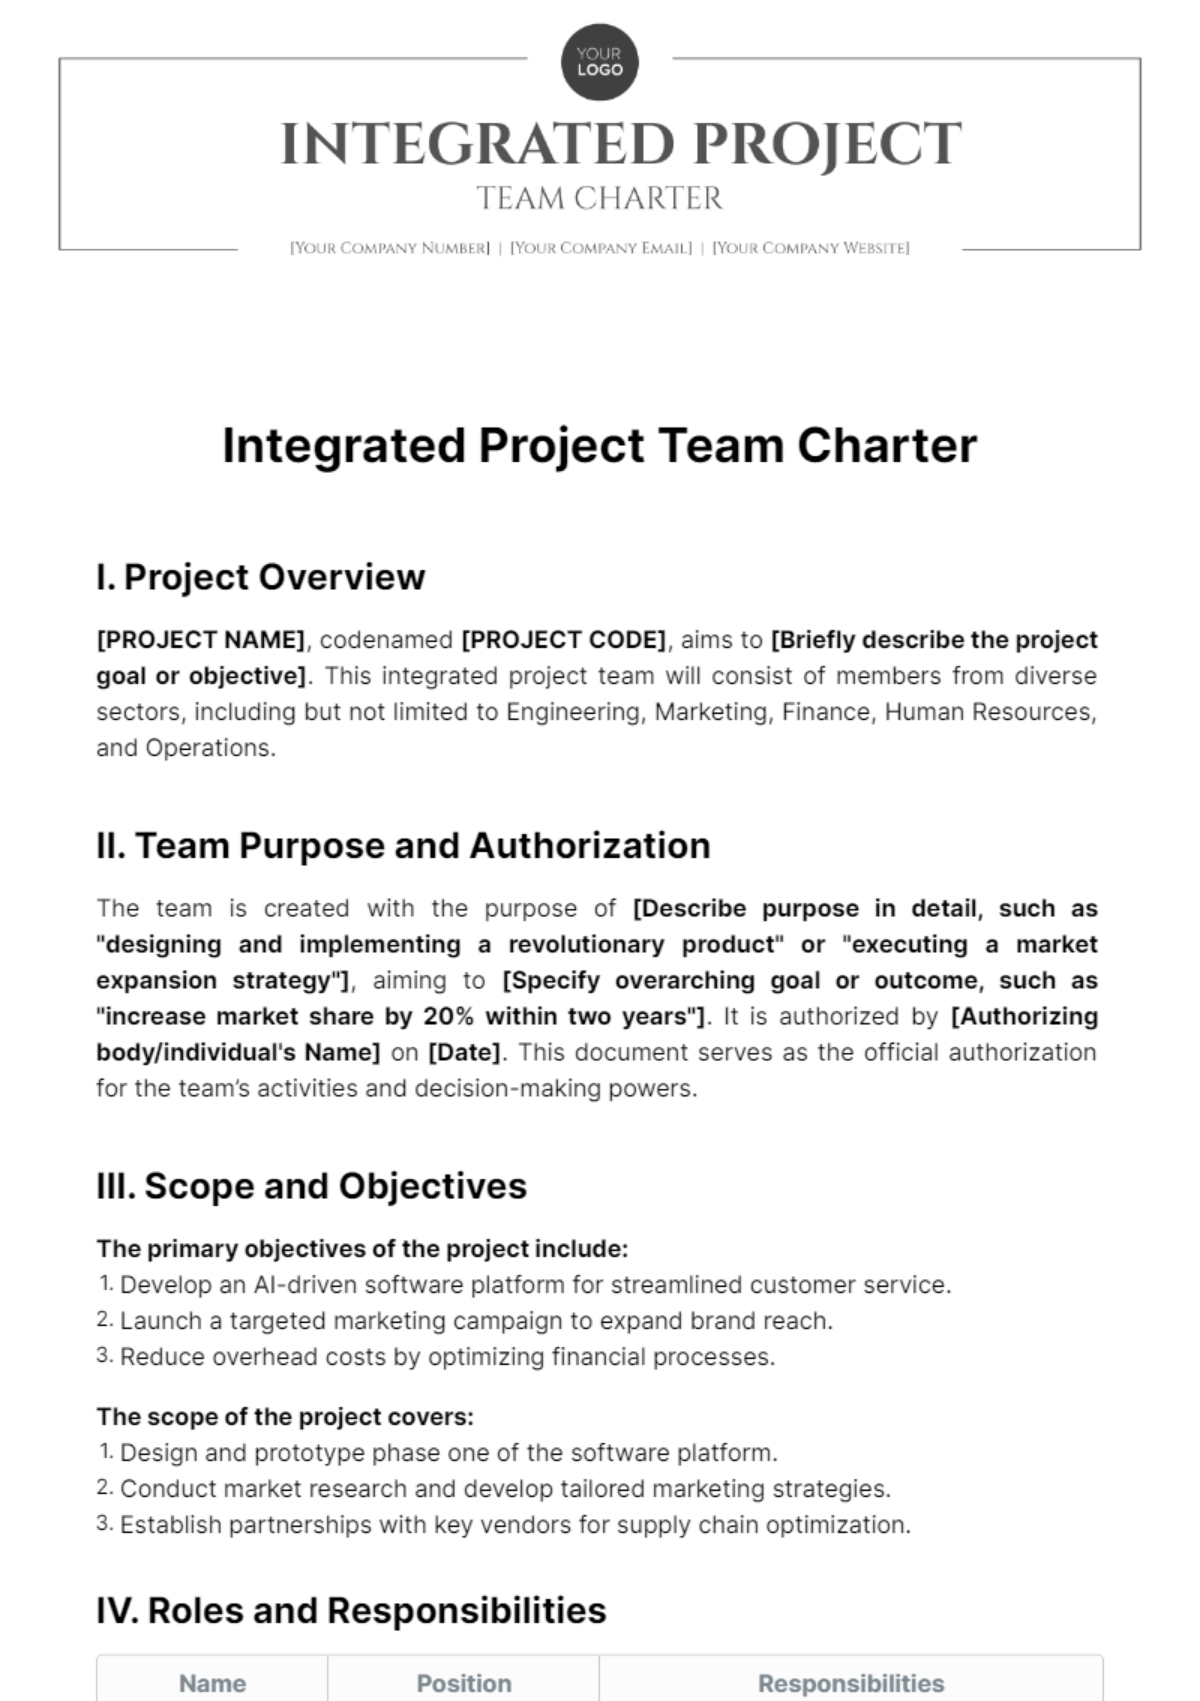 Free Integrated Project Team Charter Template